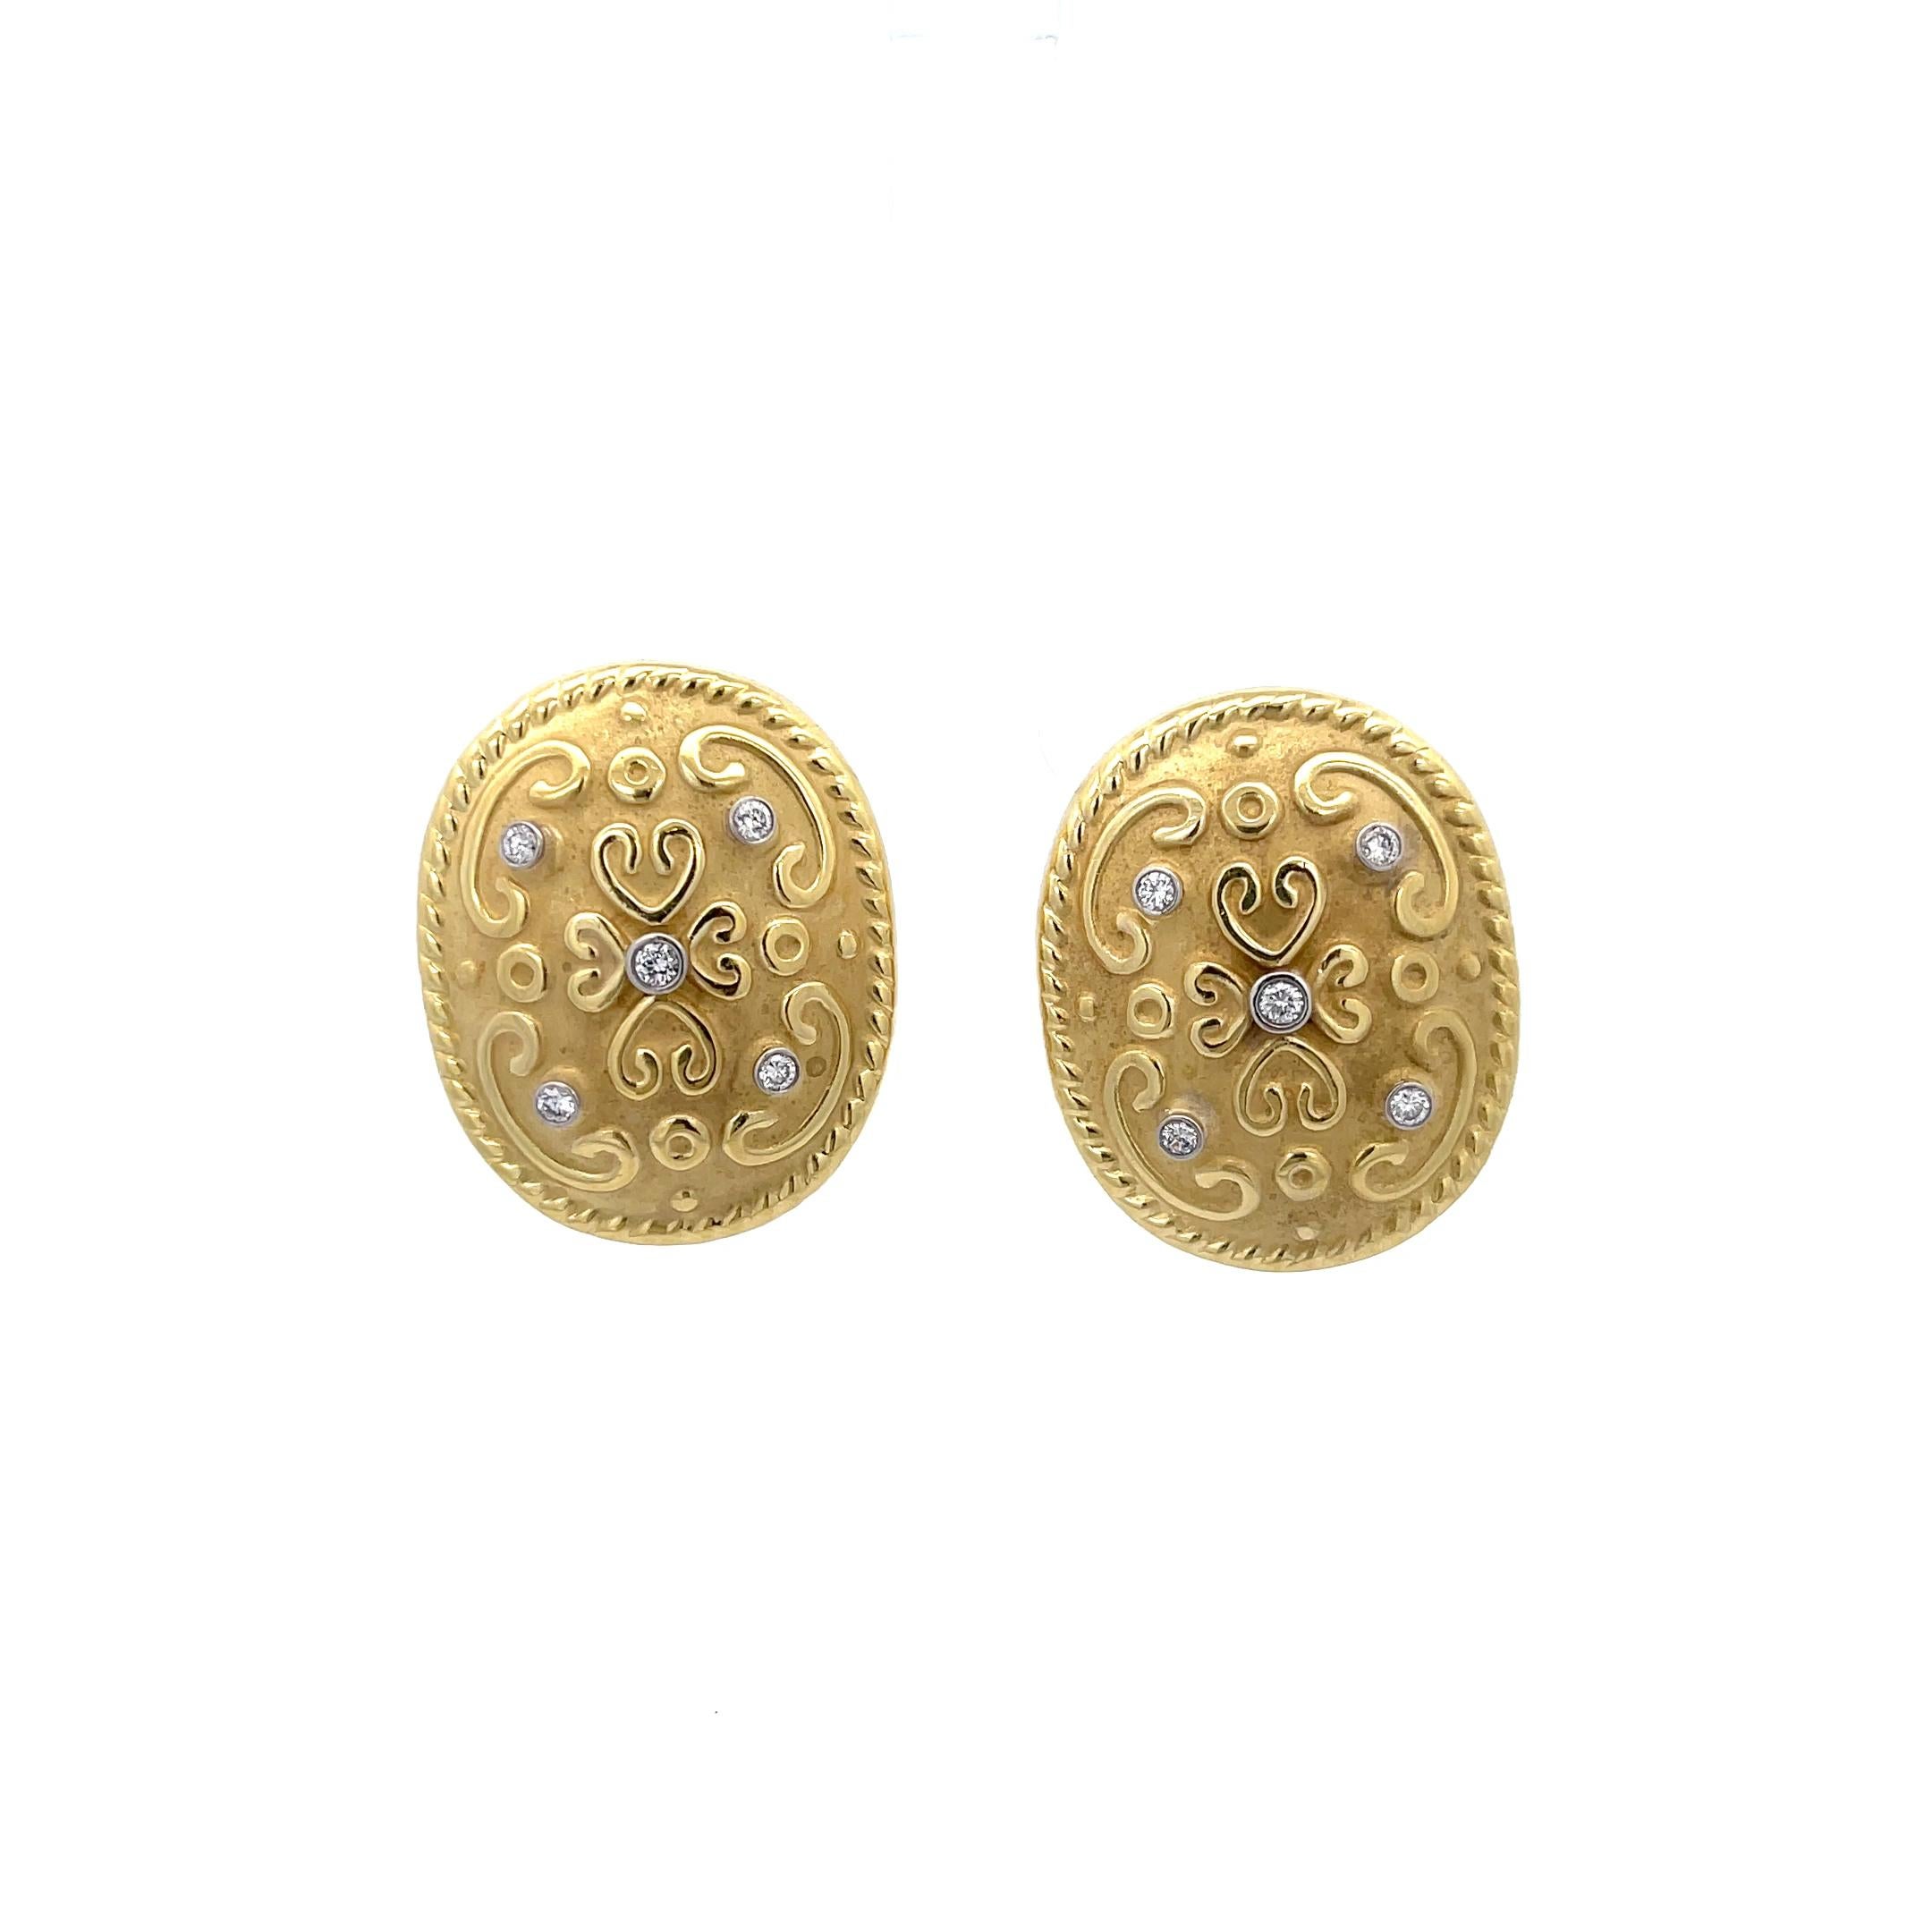 Oval Ornate Diamond Clip-on Earrings in 18K Yellow Gold. The earrings feature approximately 0.36ctw of bezel set brilliant round diamonds. The earrings measure 1.25 inches by 1 inch and weigh 13.49 grams.